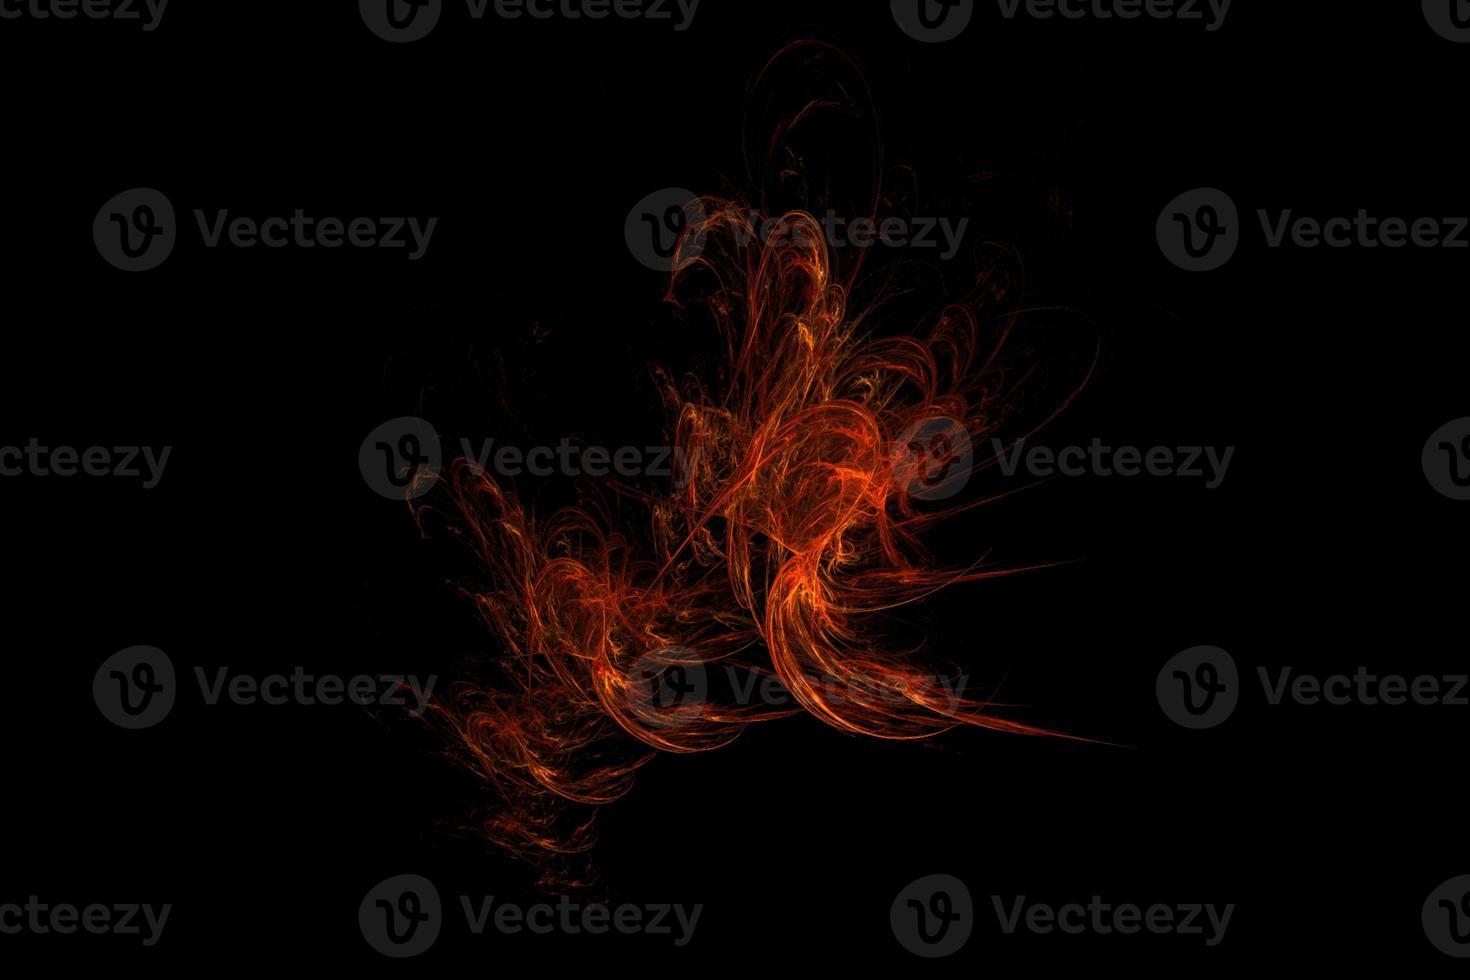 illustration drawing of a burning flame on a black background photo